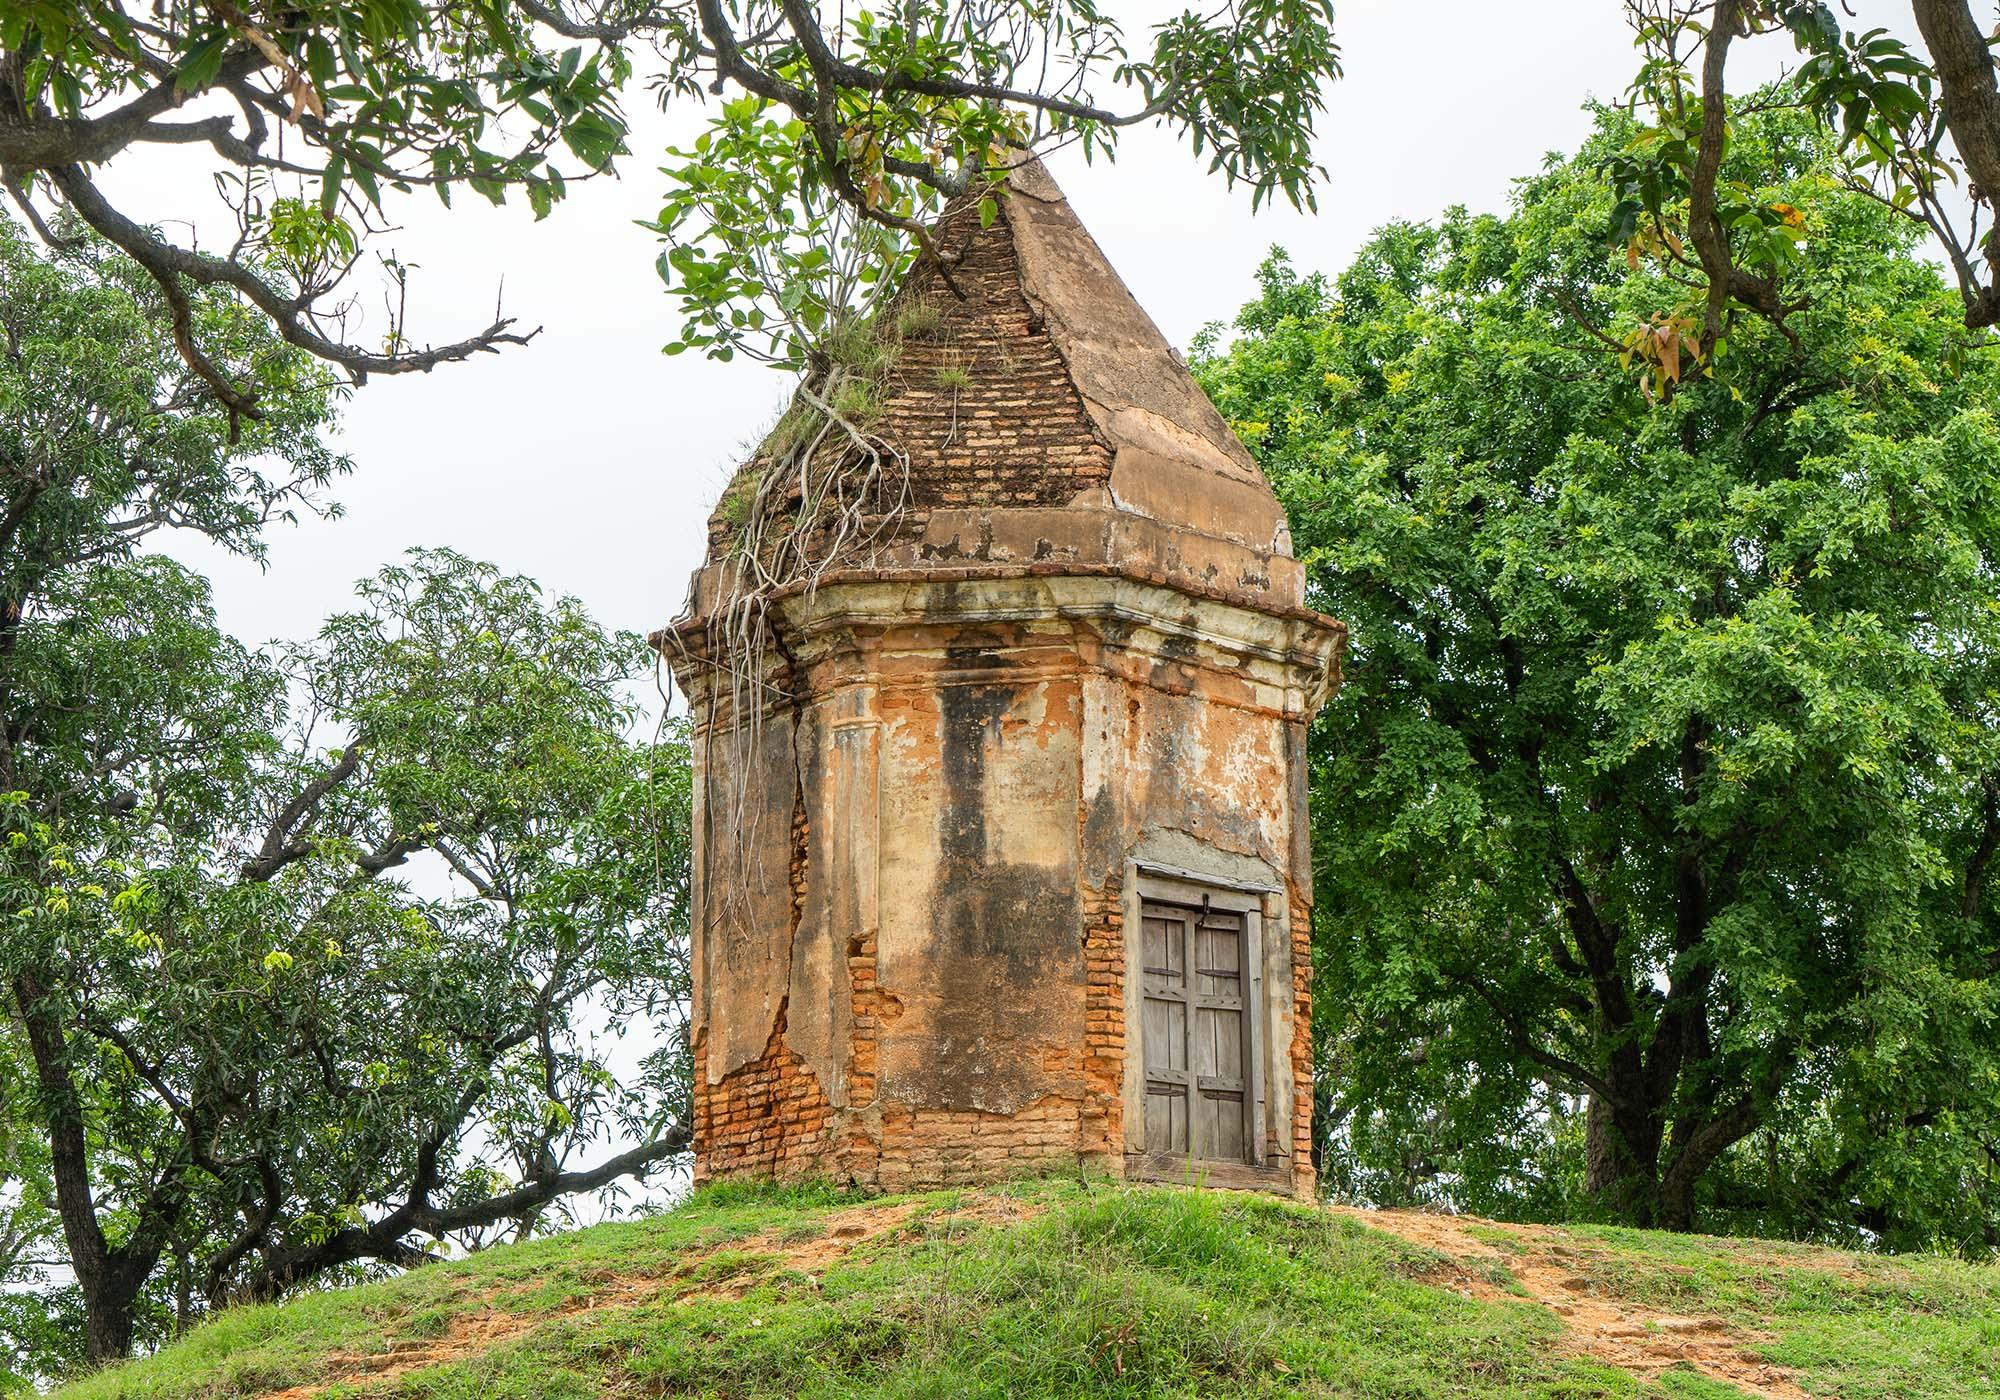 The Rahula Stupa has an octagonal Shiva temple on top of it that was built much later by Hindus. – © Michael Turtle